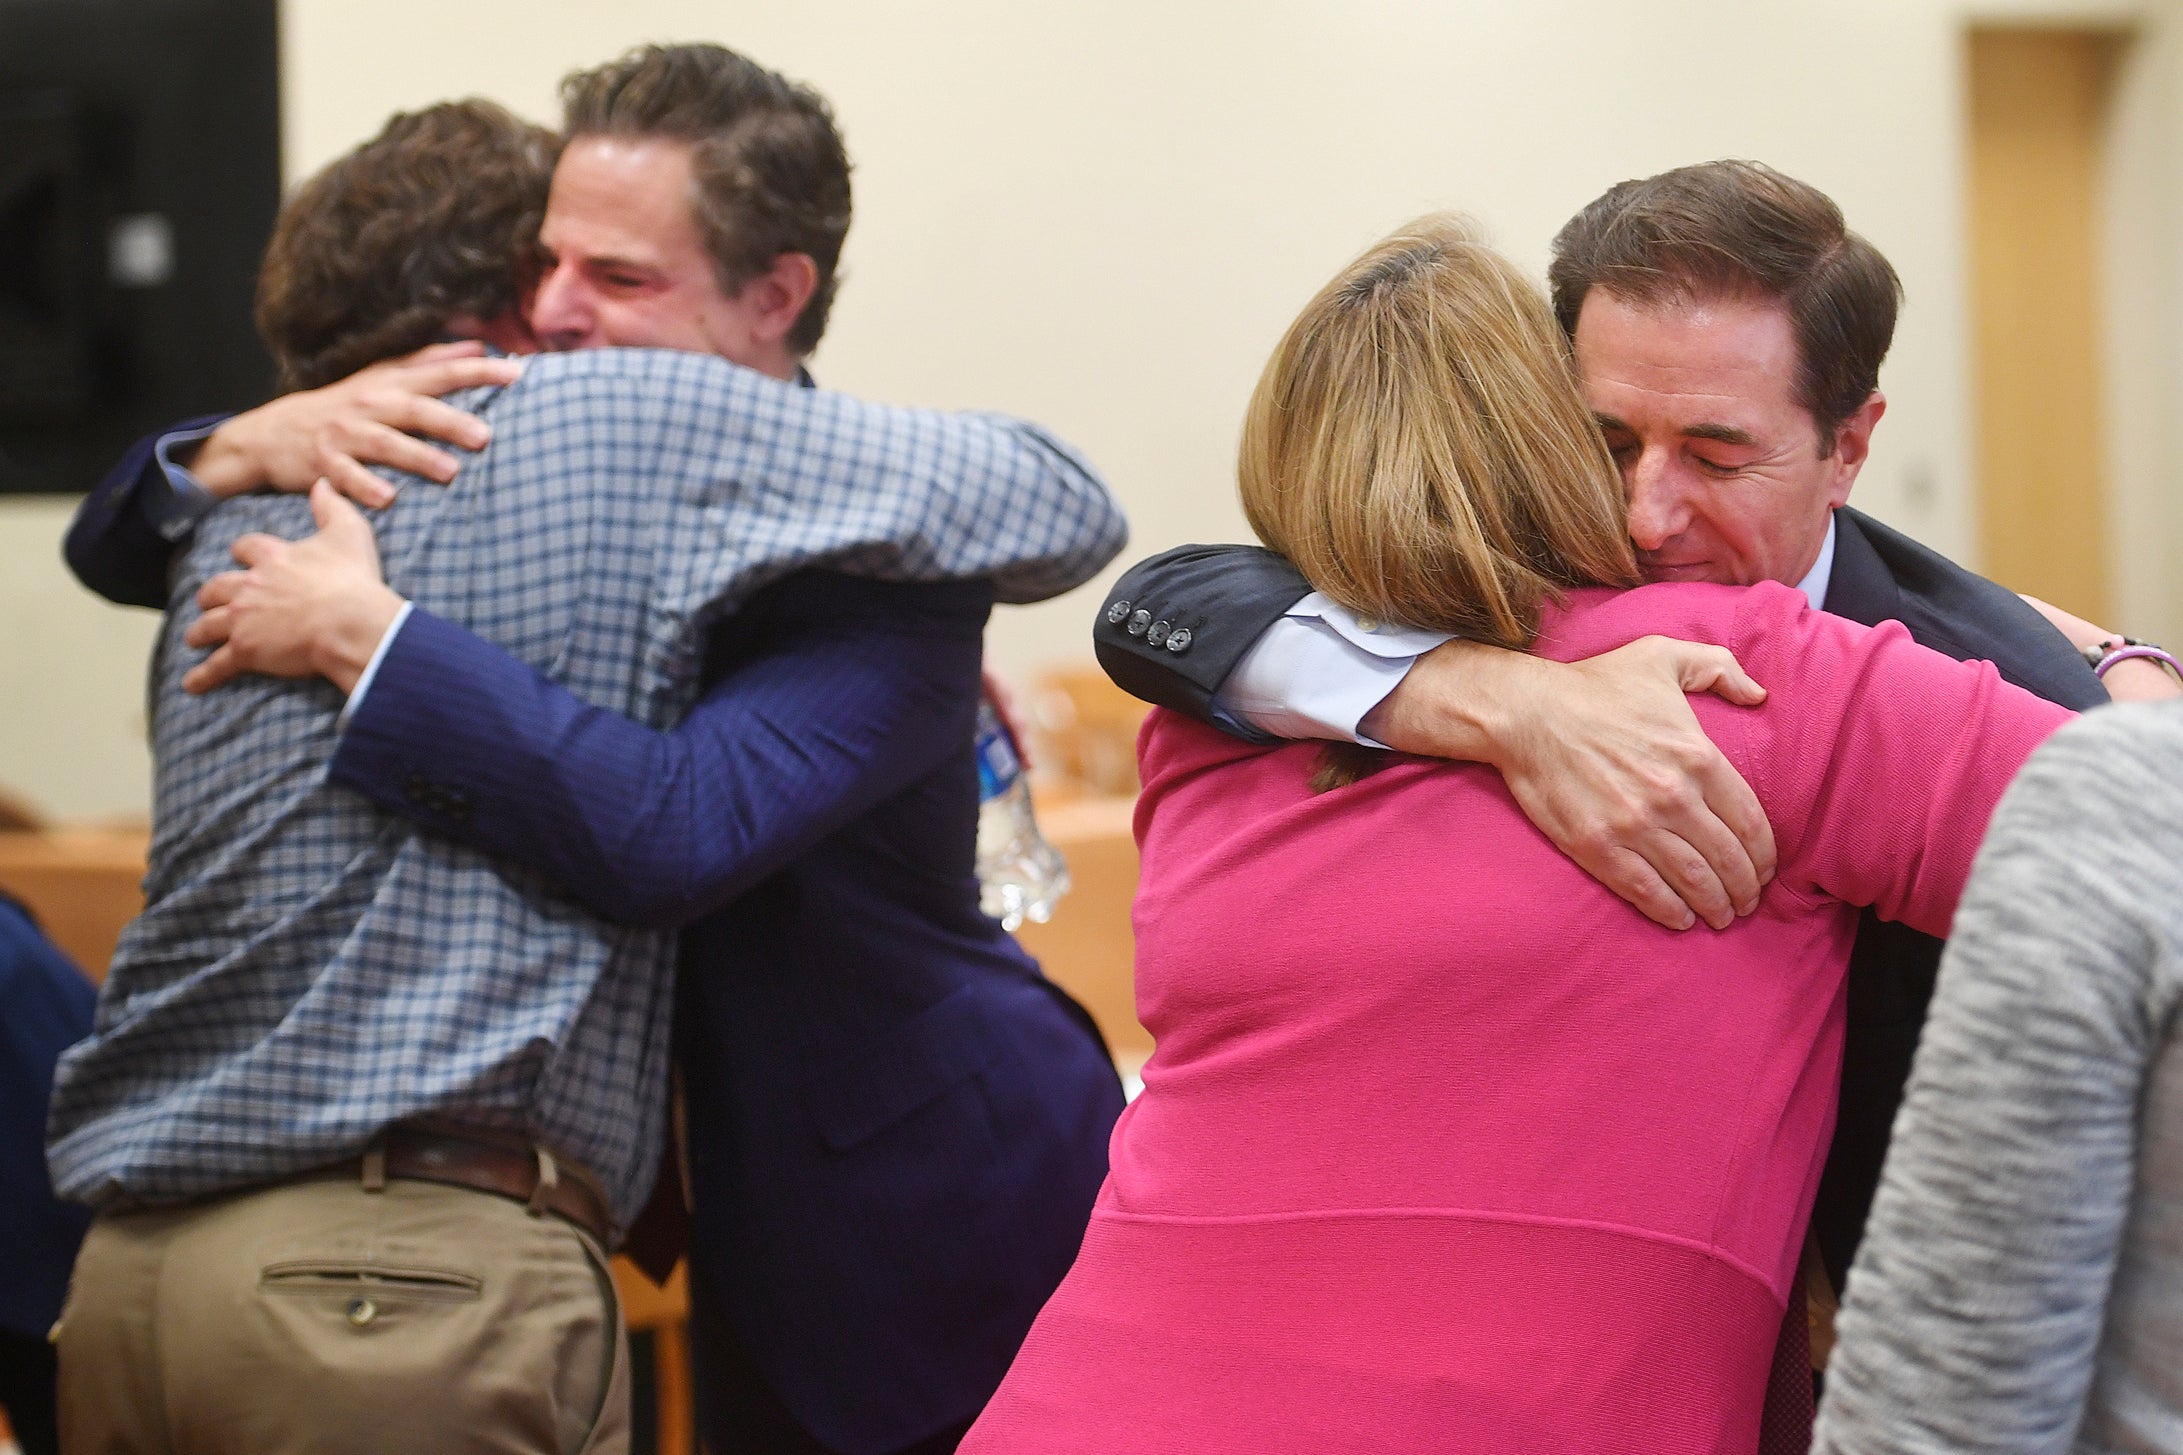 Sandy Hook families embrace as the jury delivers its verdict on compenstory damages